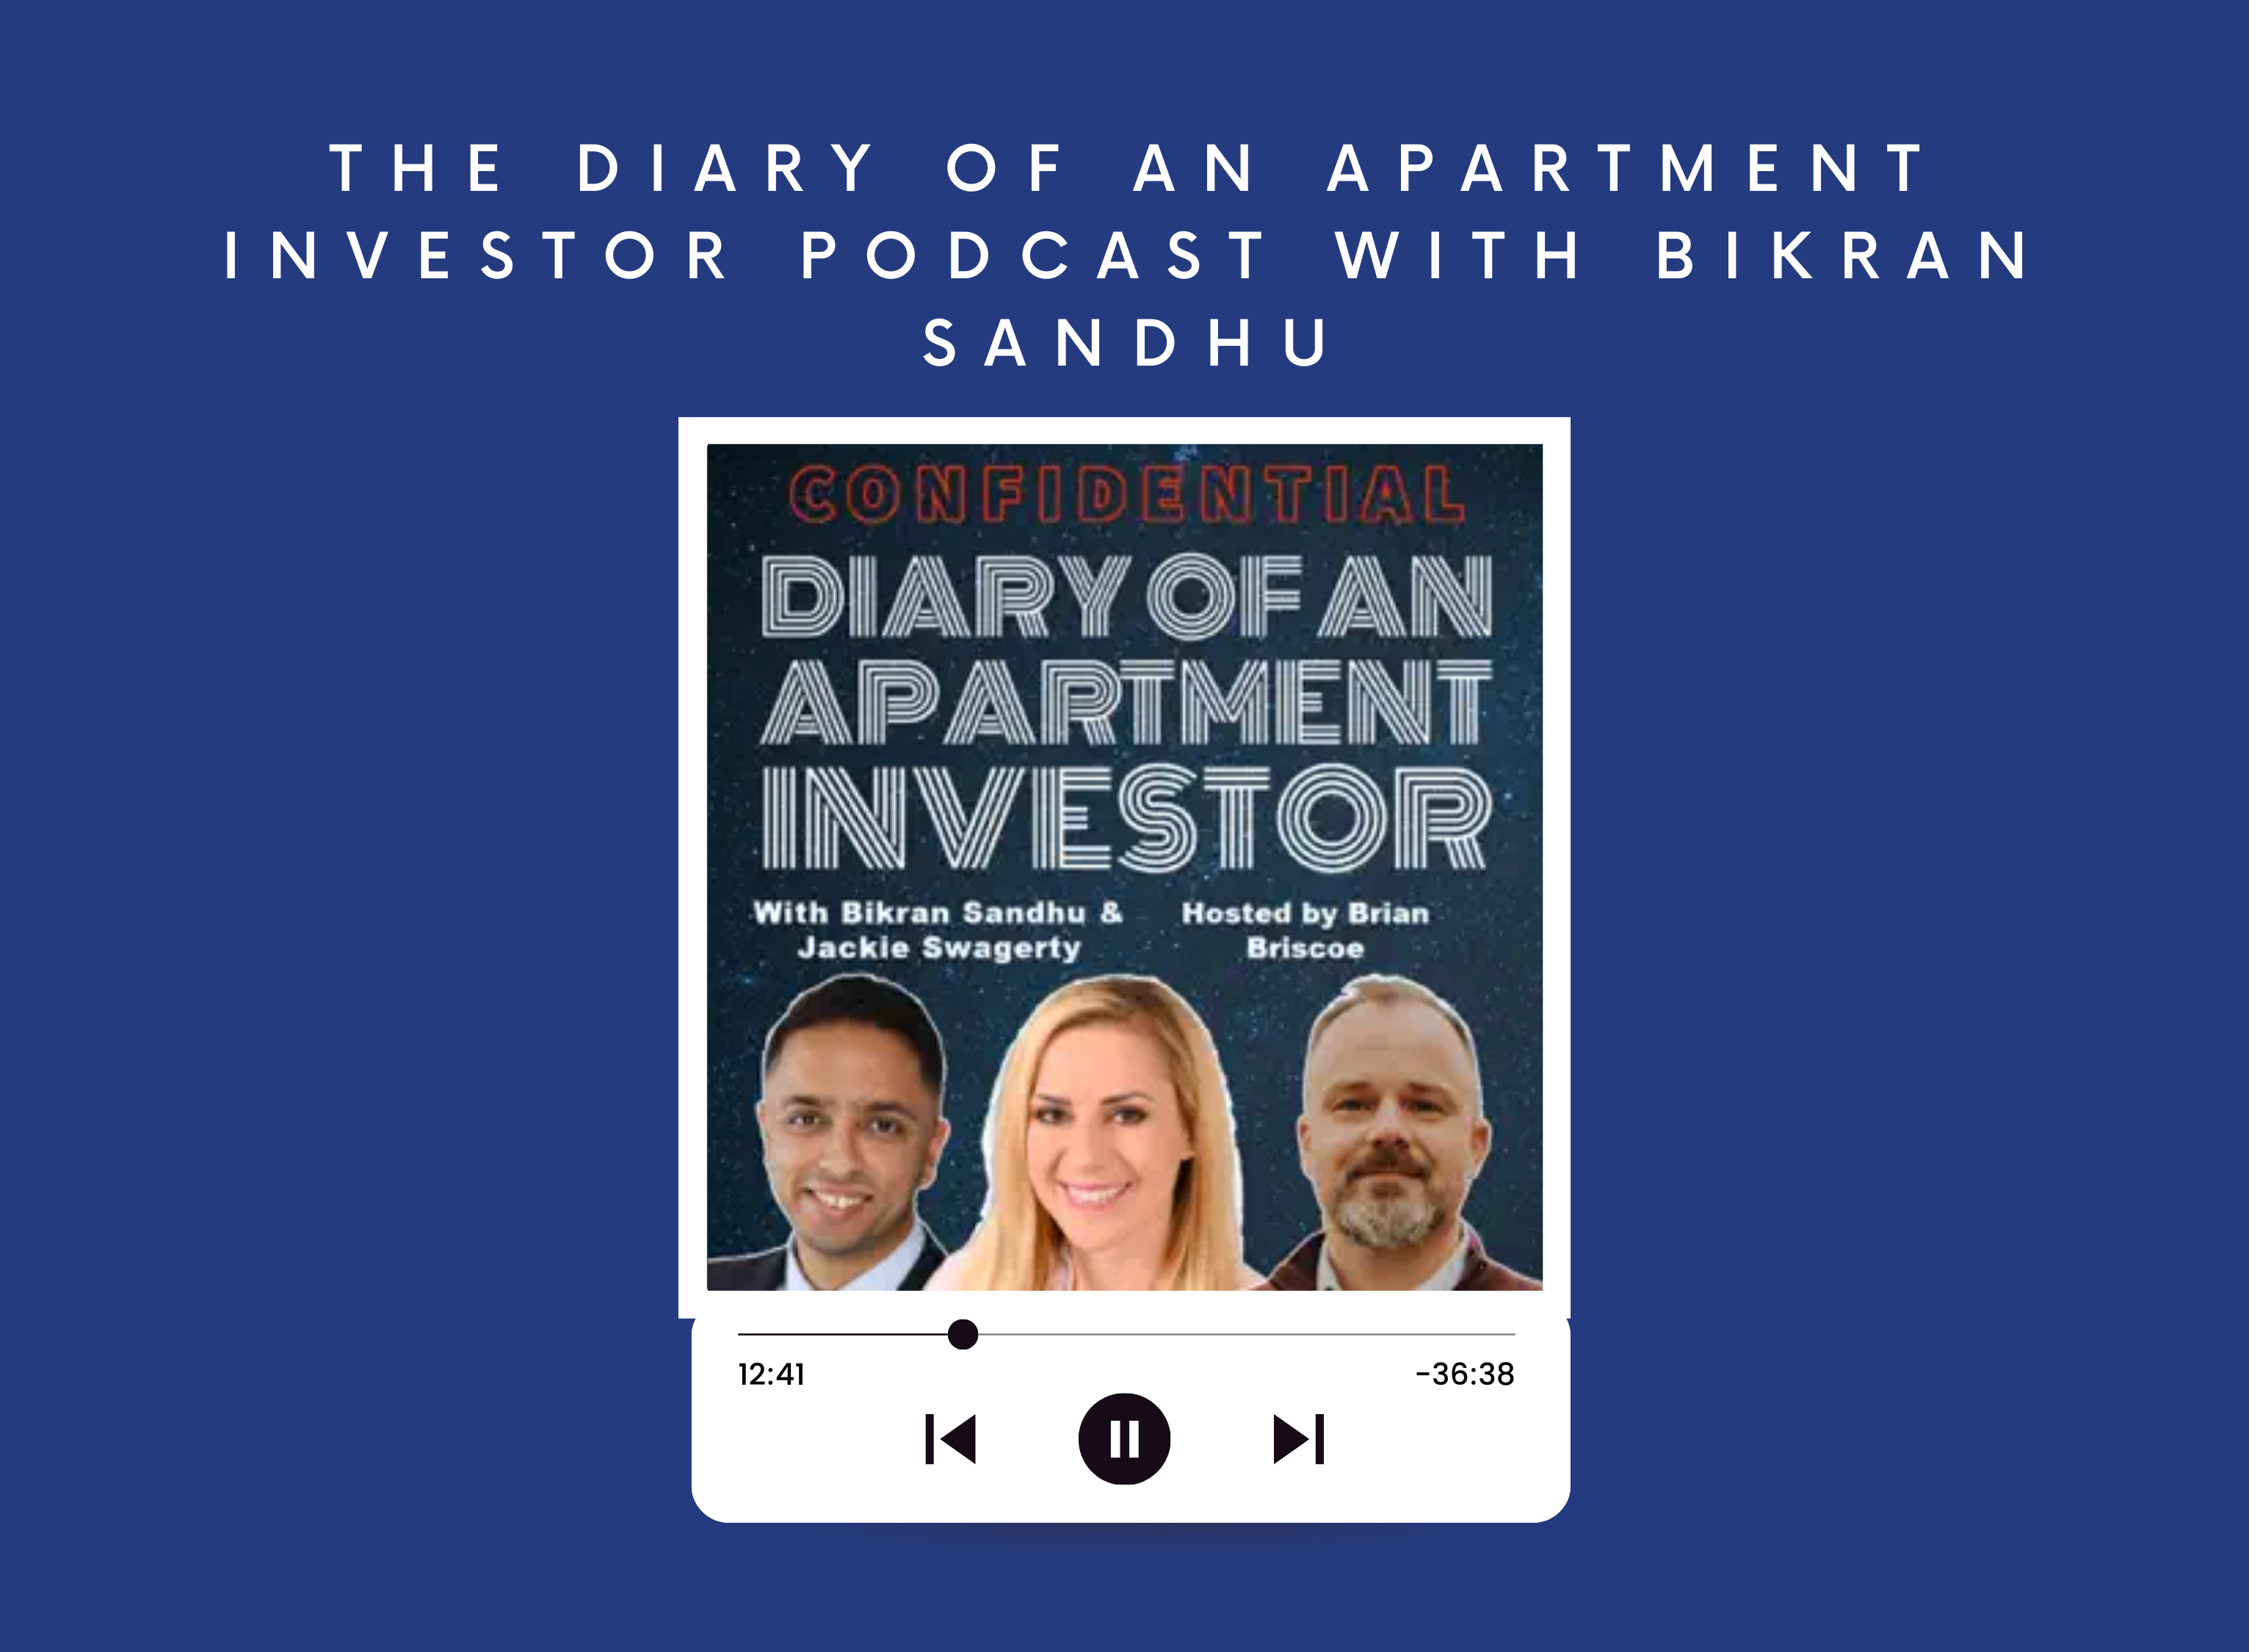 The Diary of an Apartment Investor Podcast with Bikran Sandhu